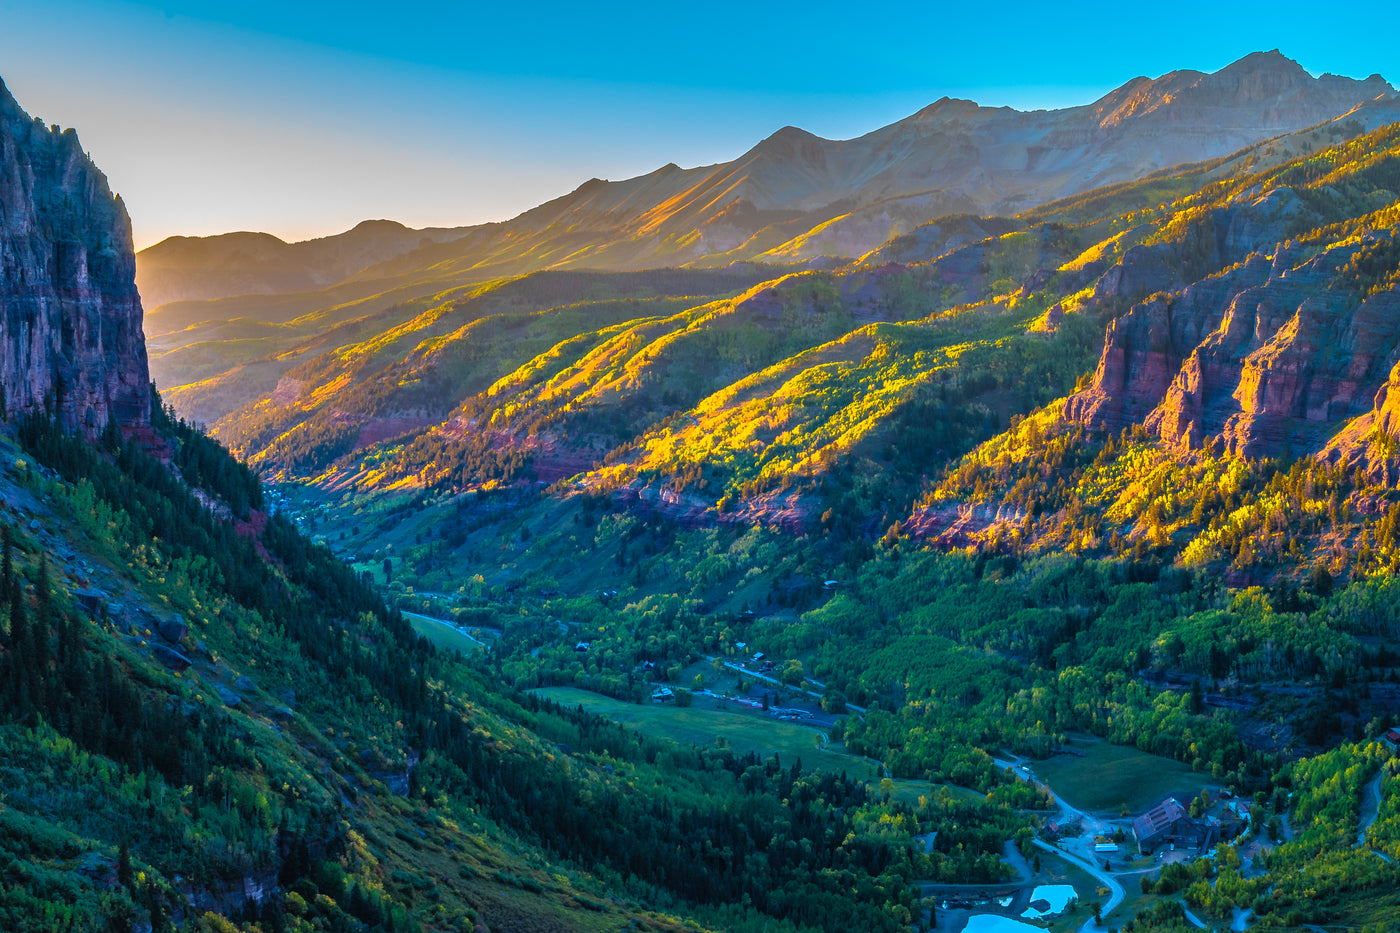 Sunlit Telluride box canyon with the san miguel river flowing through and fields of green aspen trees